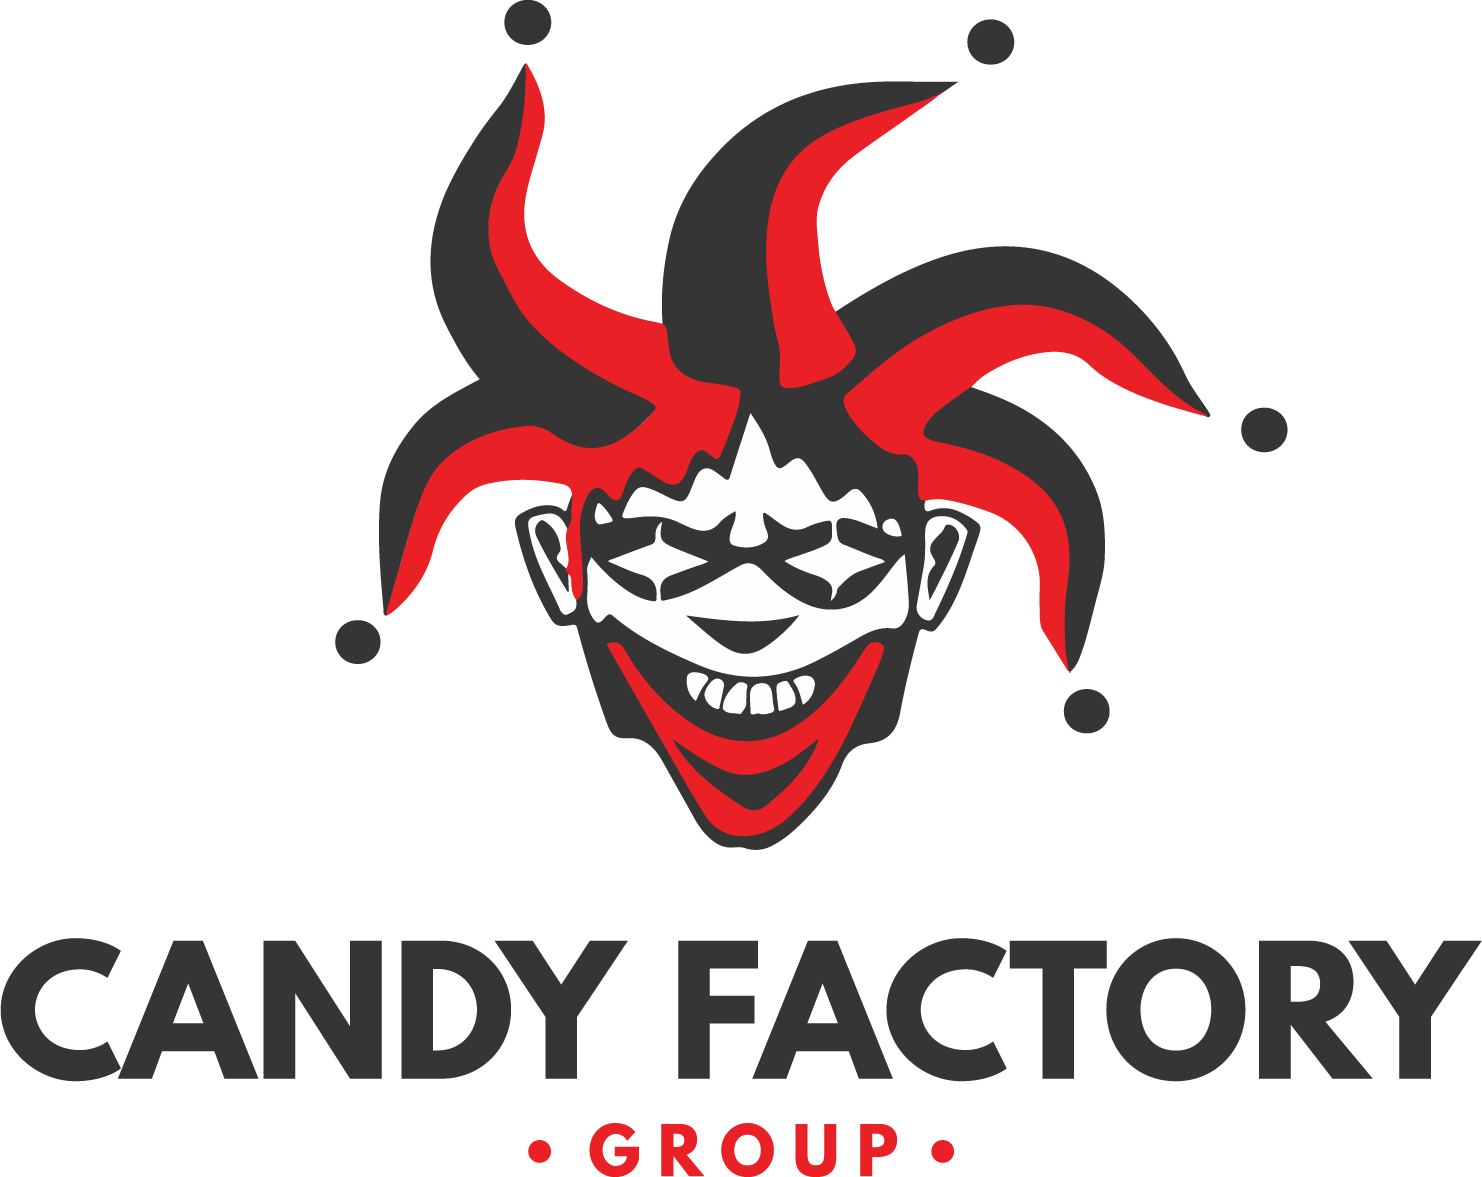 Candy Factory Group